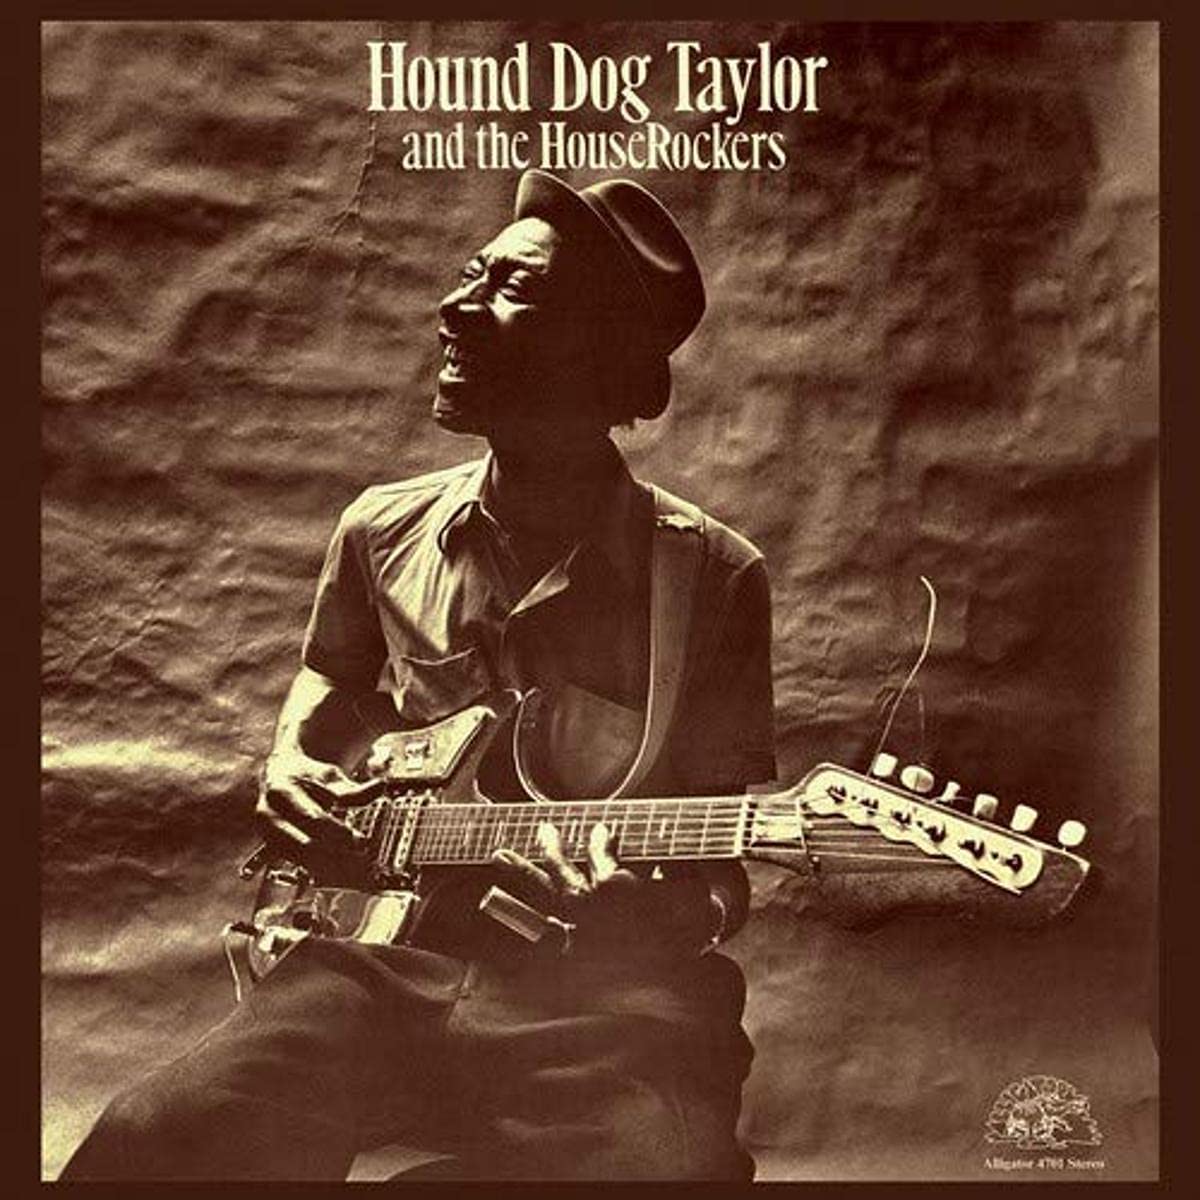 Hound Dog Taylor and the House Rockers - Hound Dog Taylor and the Houserockers (Vinyl LP)